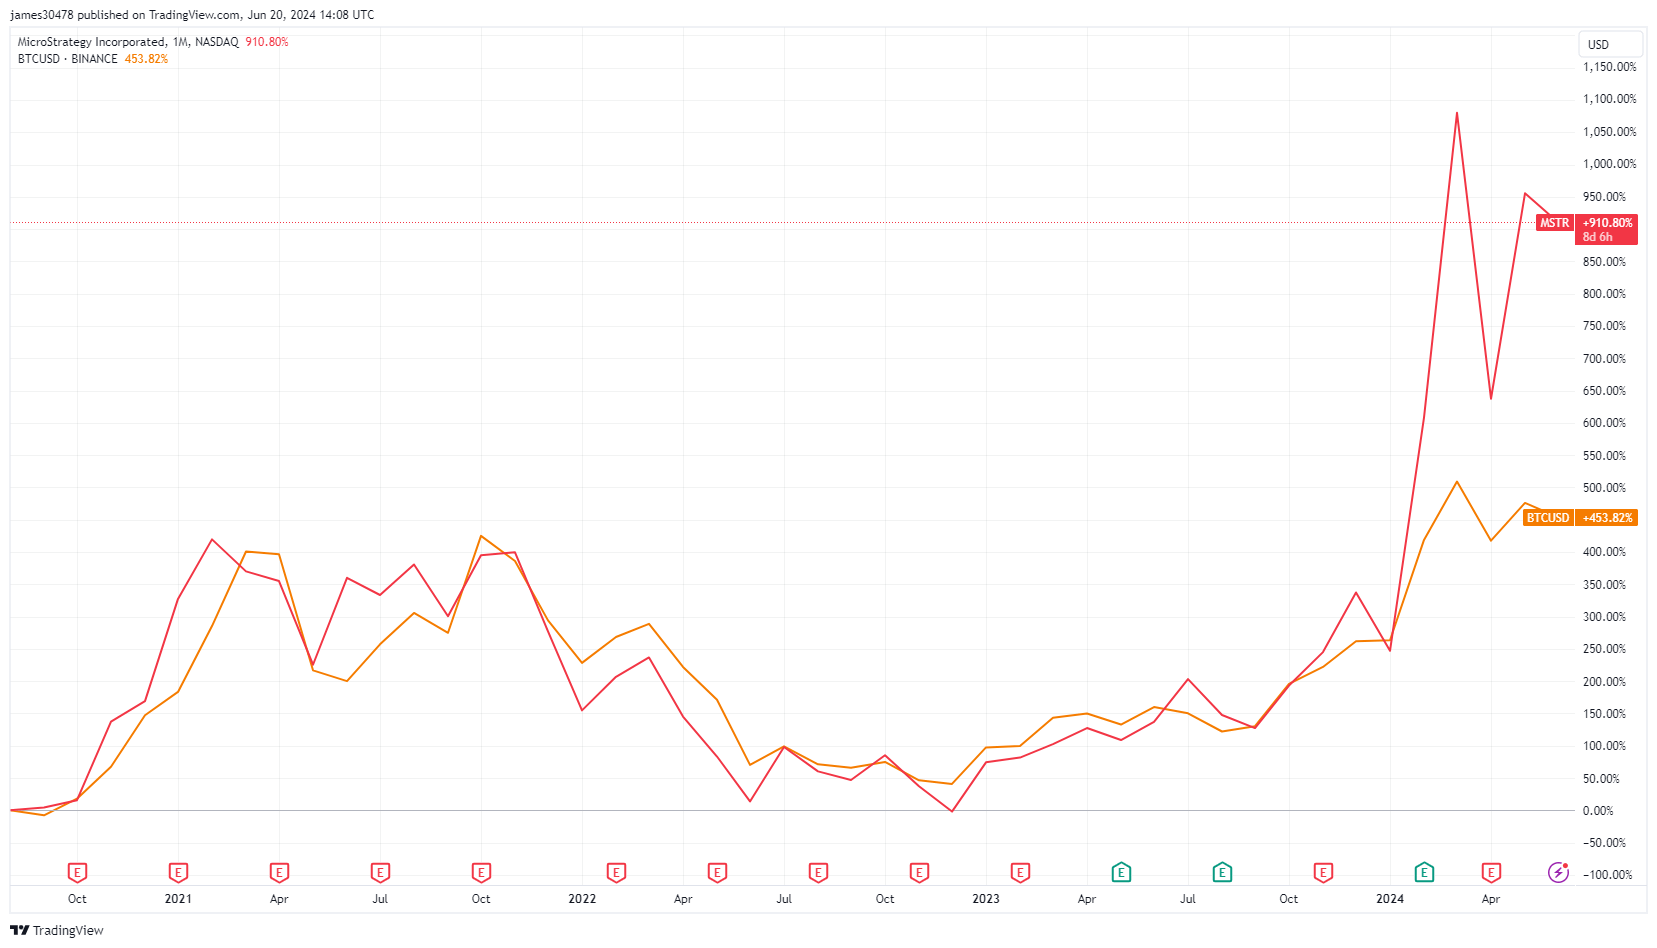 MicroStrategy vs. BTC since the announcement: (Source: TradingView)